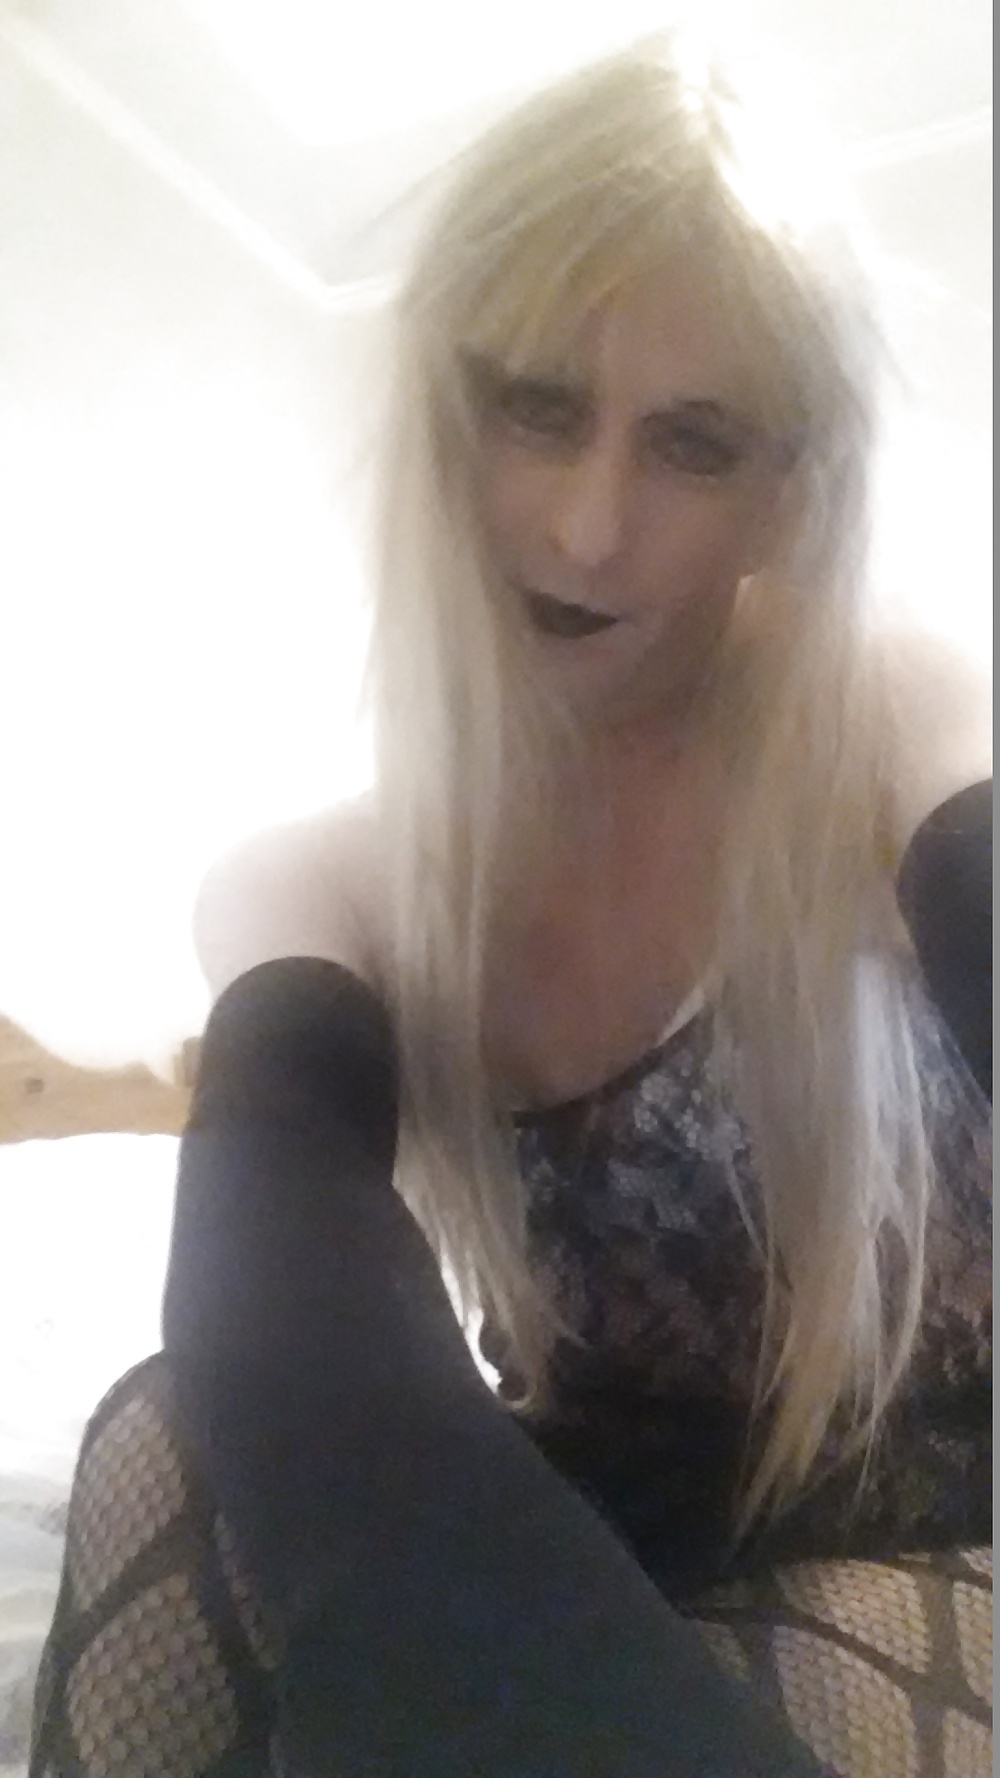 More Of Me With Black Lipstick On #41006917